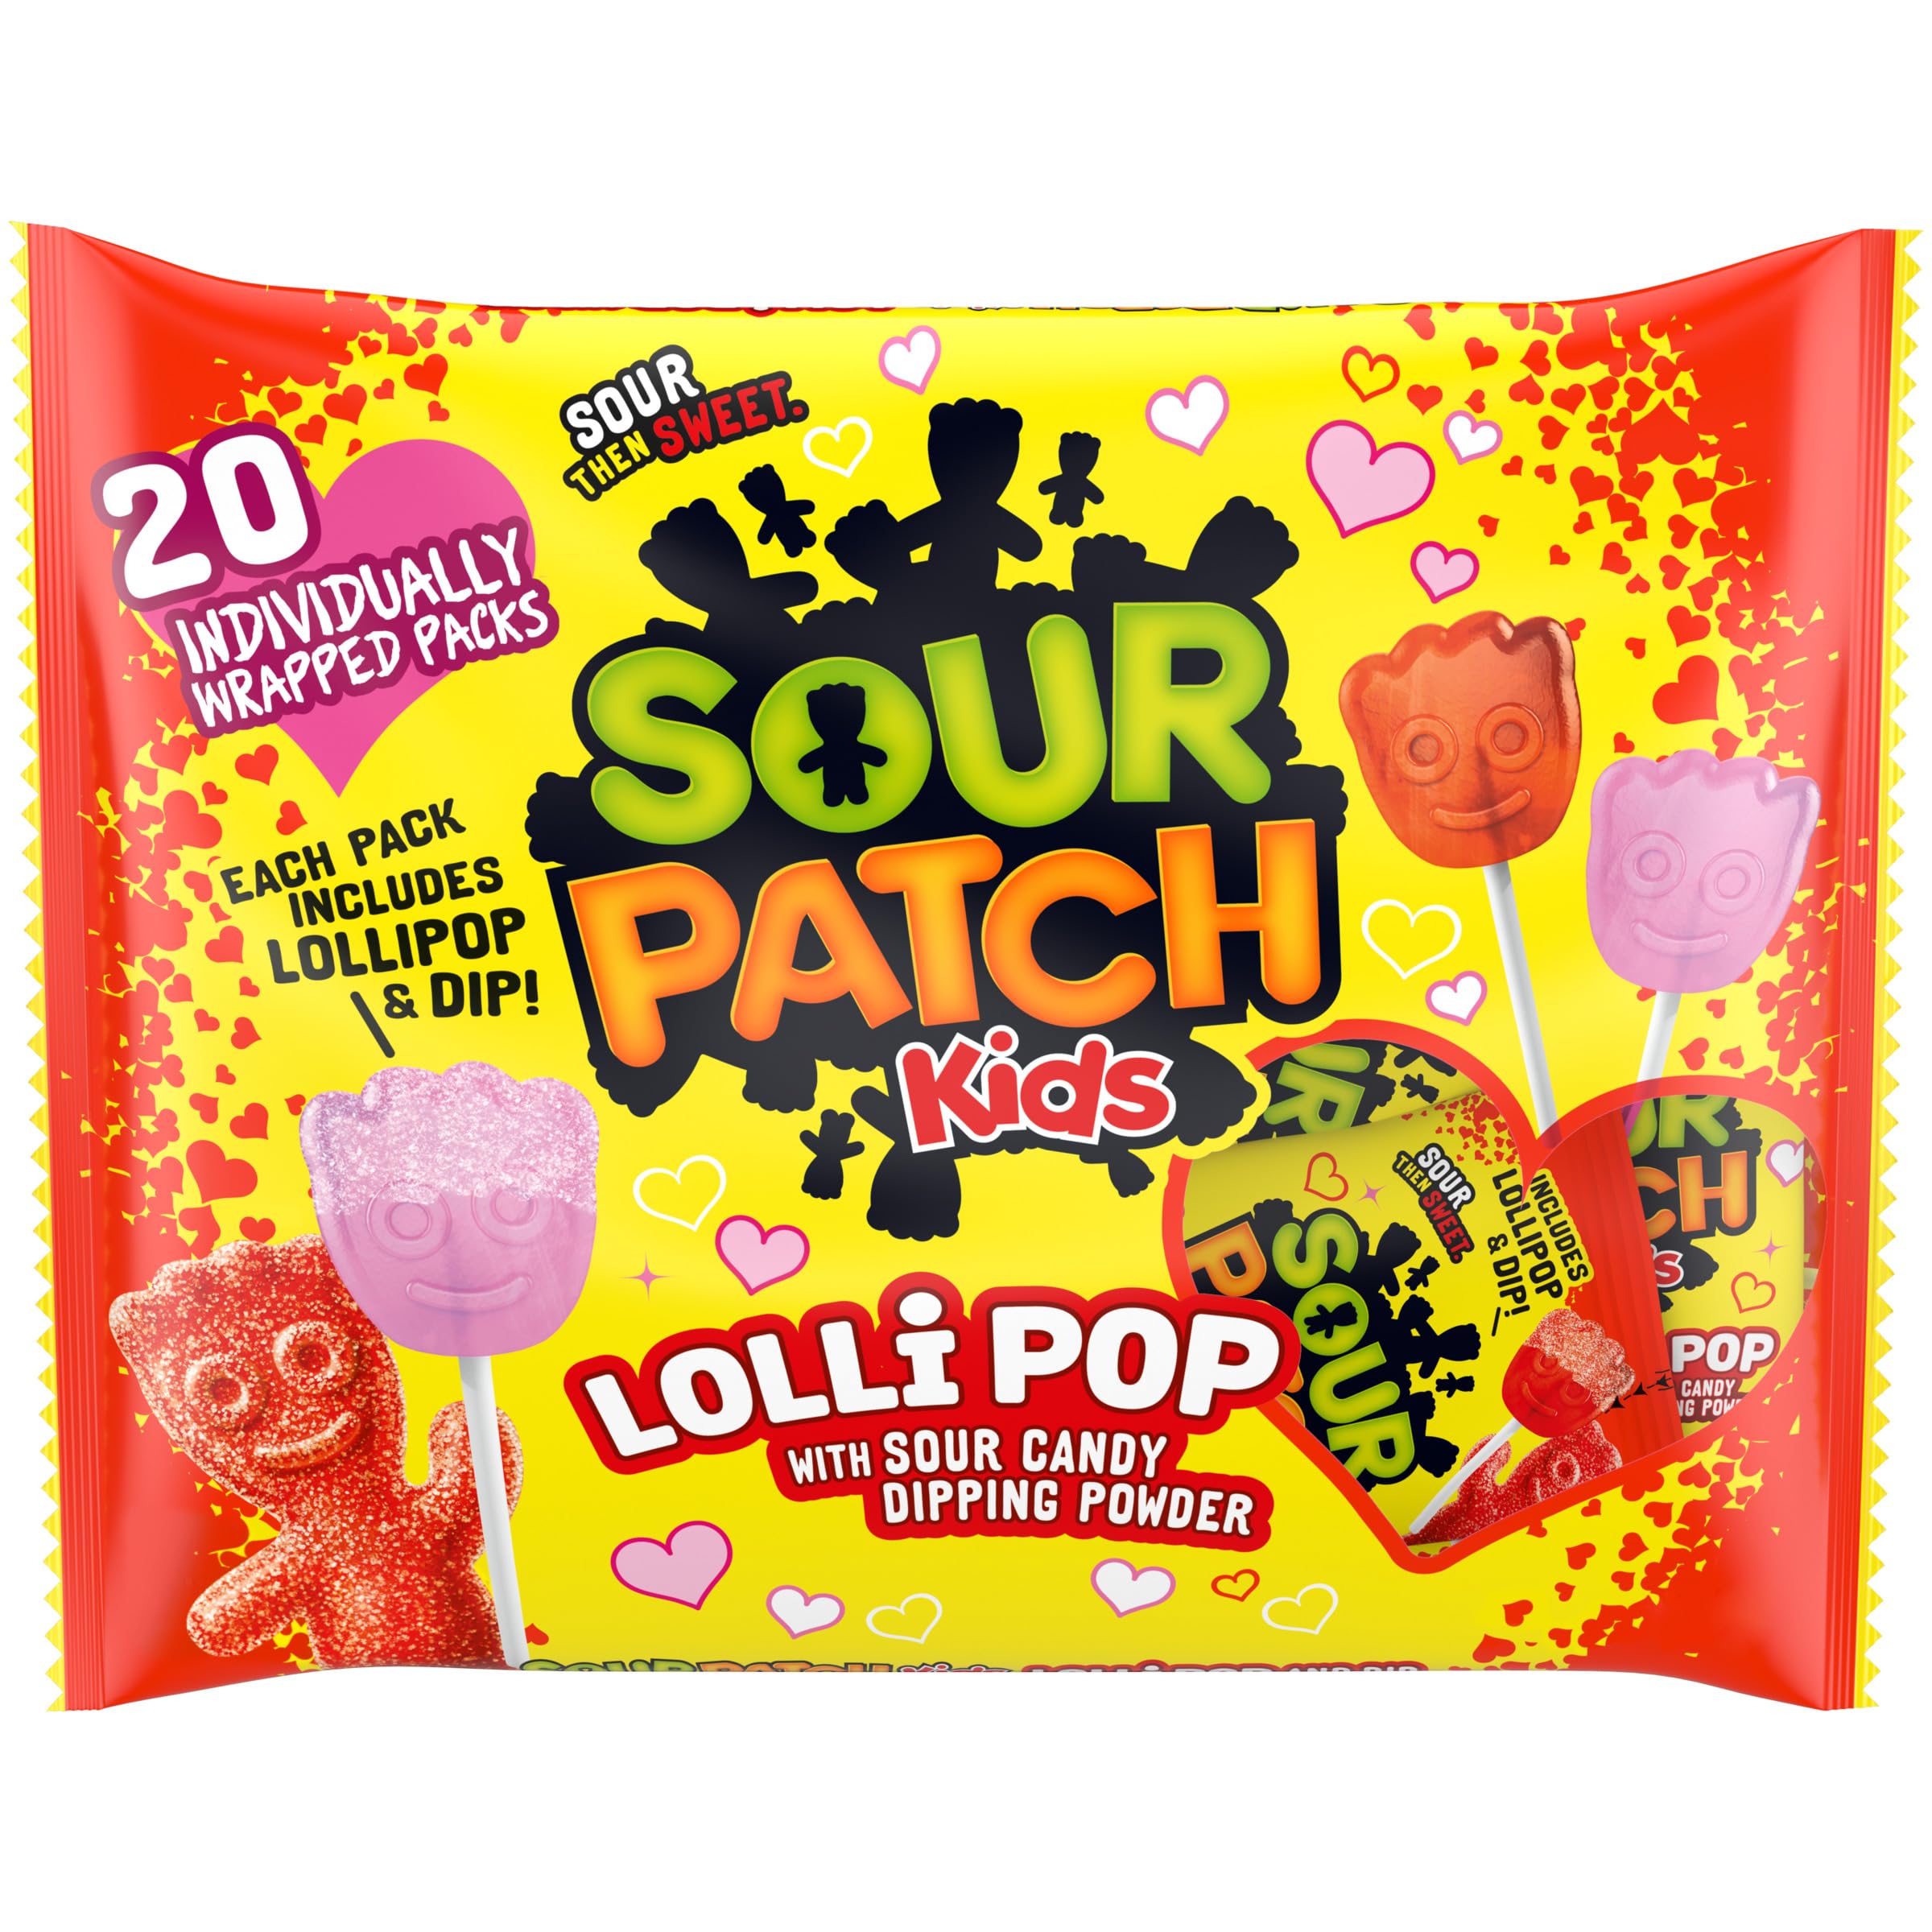 Sour Patch Kids- Wrapped Lollipops with Sour Candy Dipping Powder